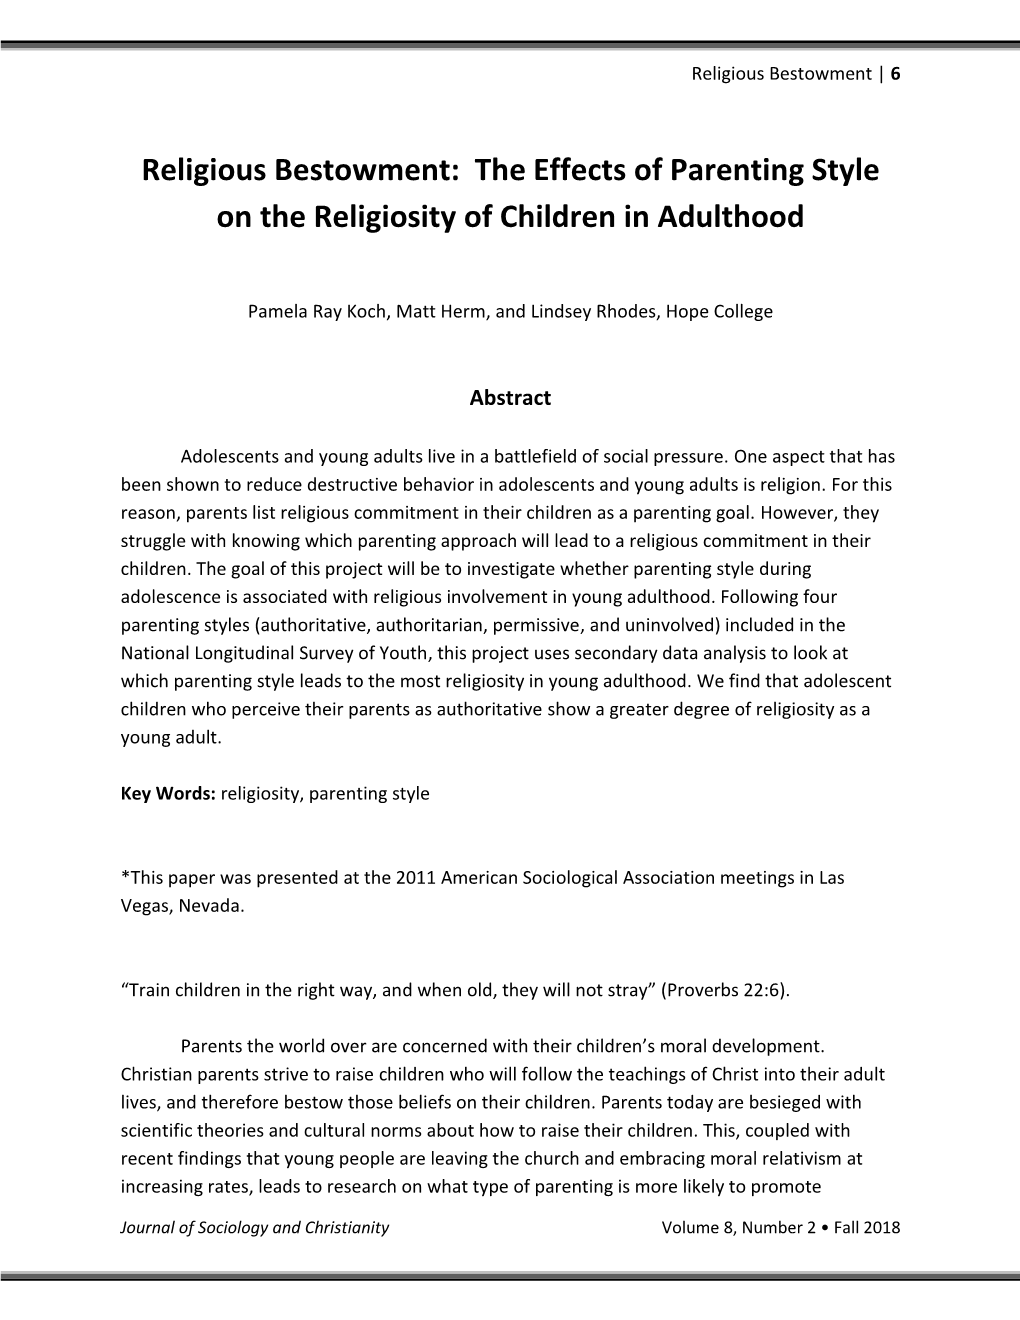 Religious Bestowment: the Effects of Parenting Style on the Religiosity of Children in Adulthood